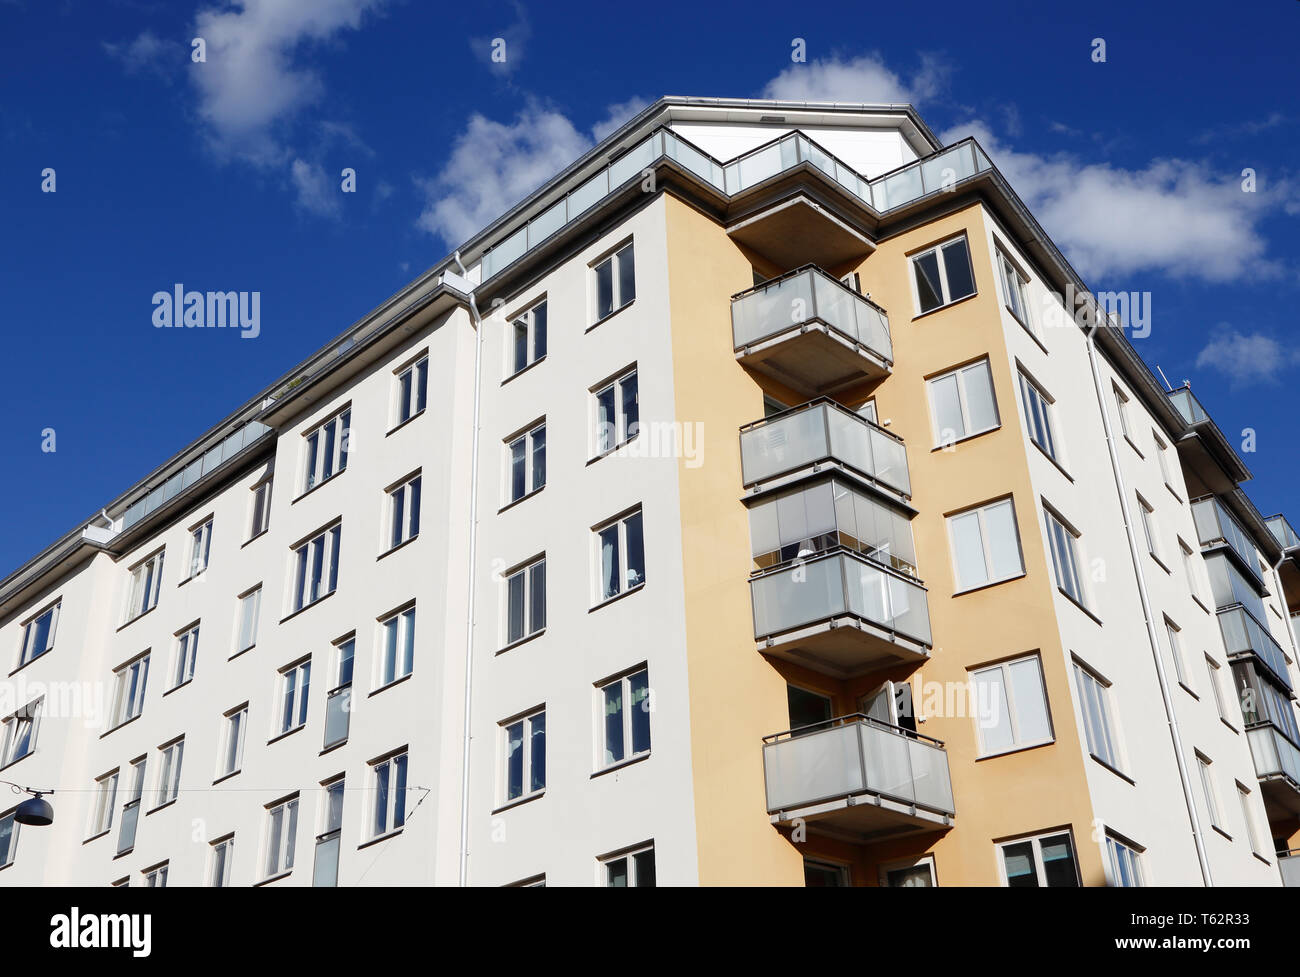 Low angel view of a multi story residential apartment building. Stock Photo